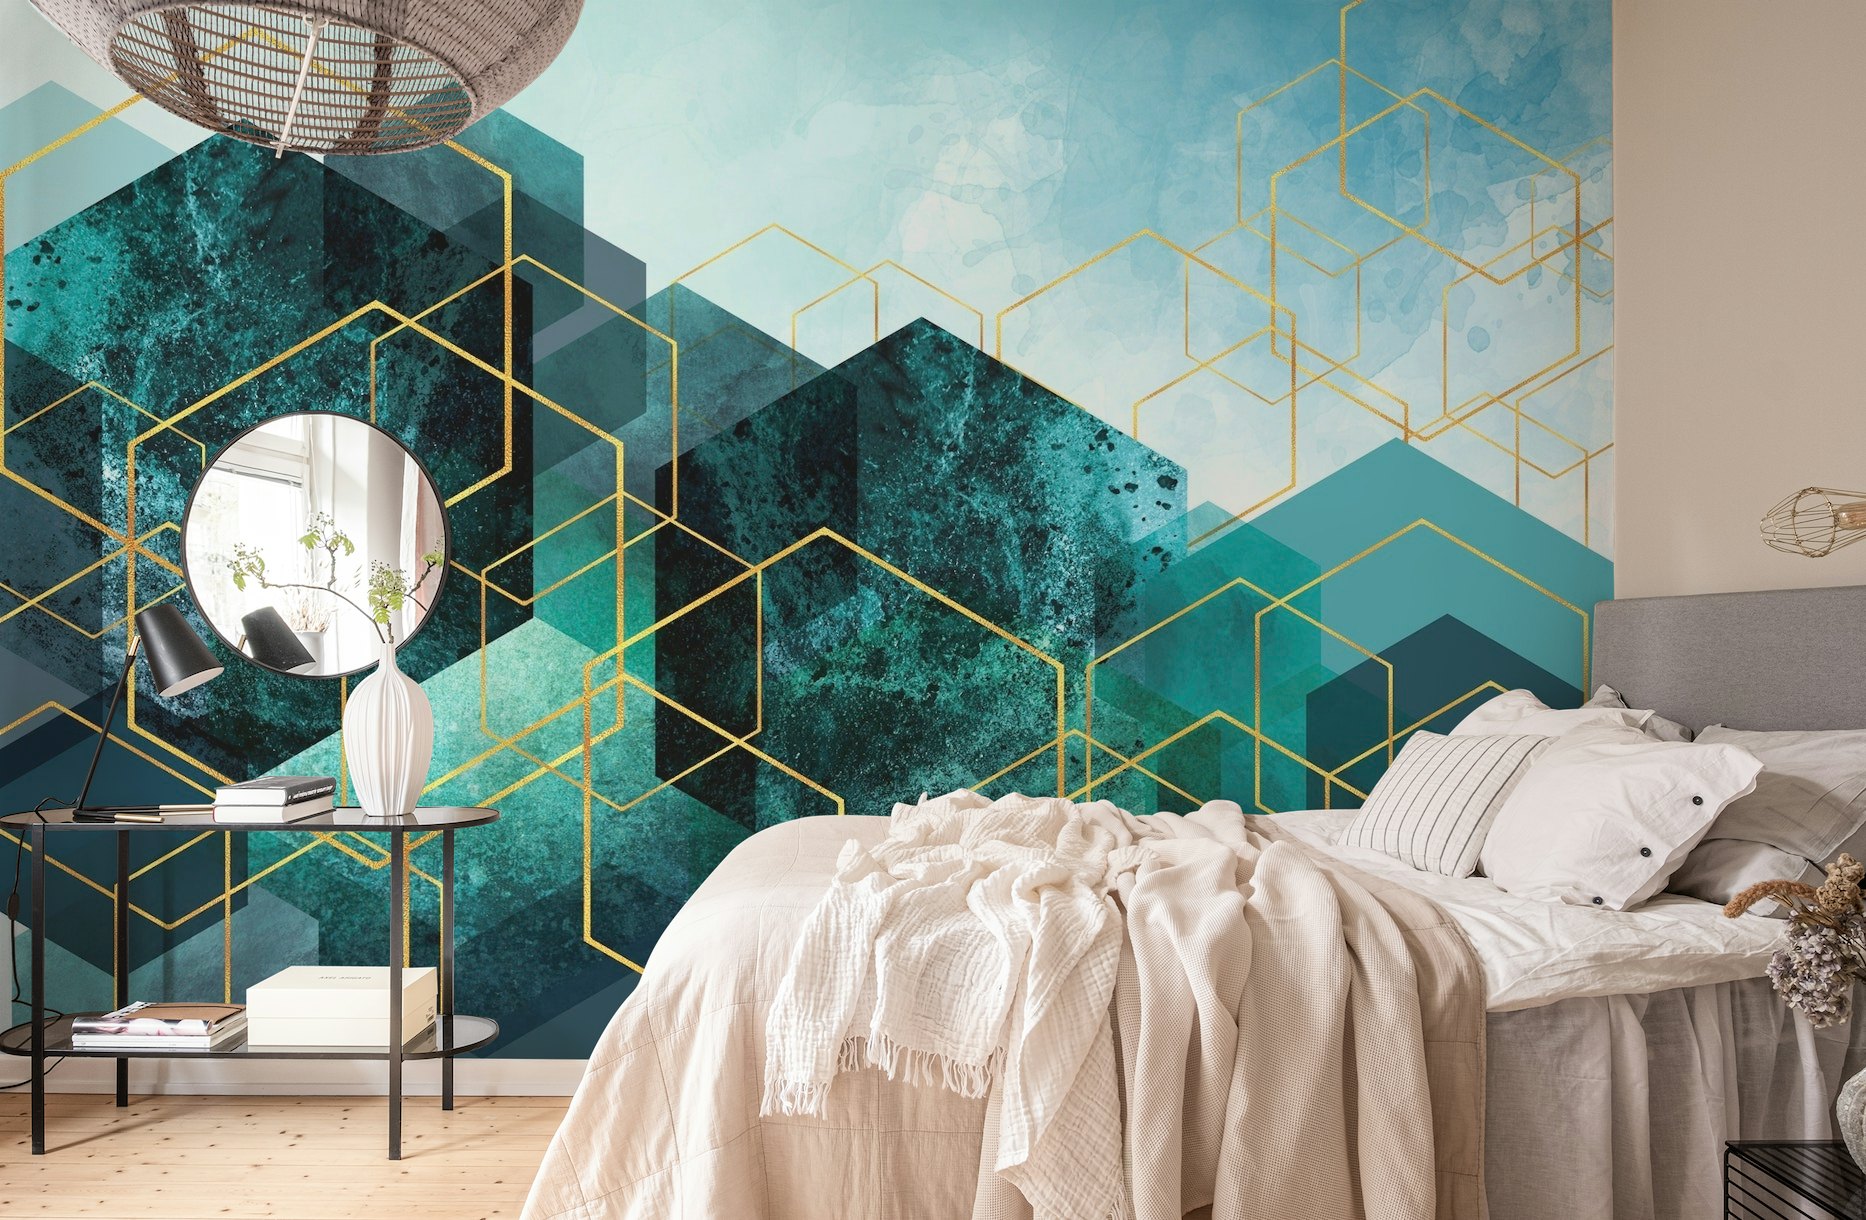 Abstract Landscape in Teal wallpaper